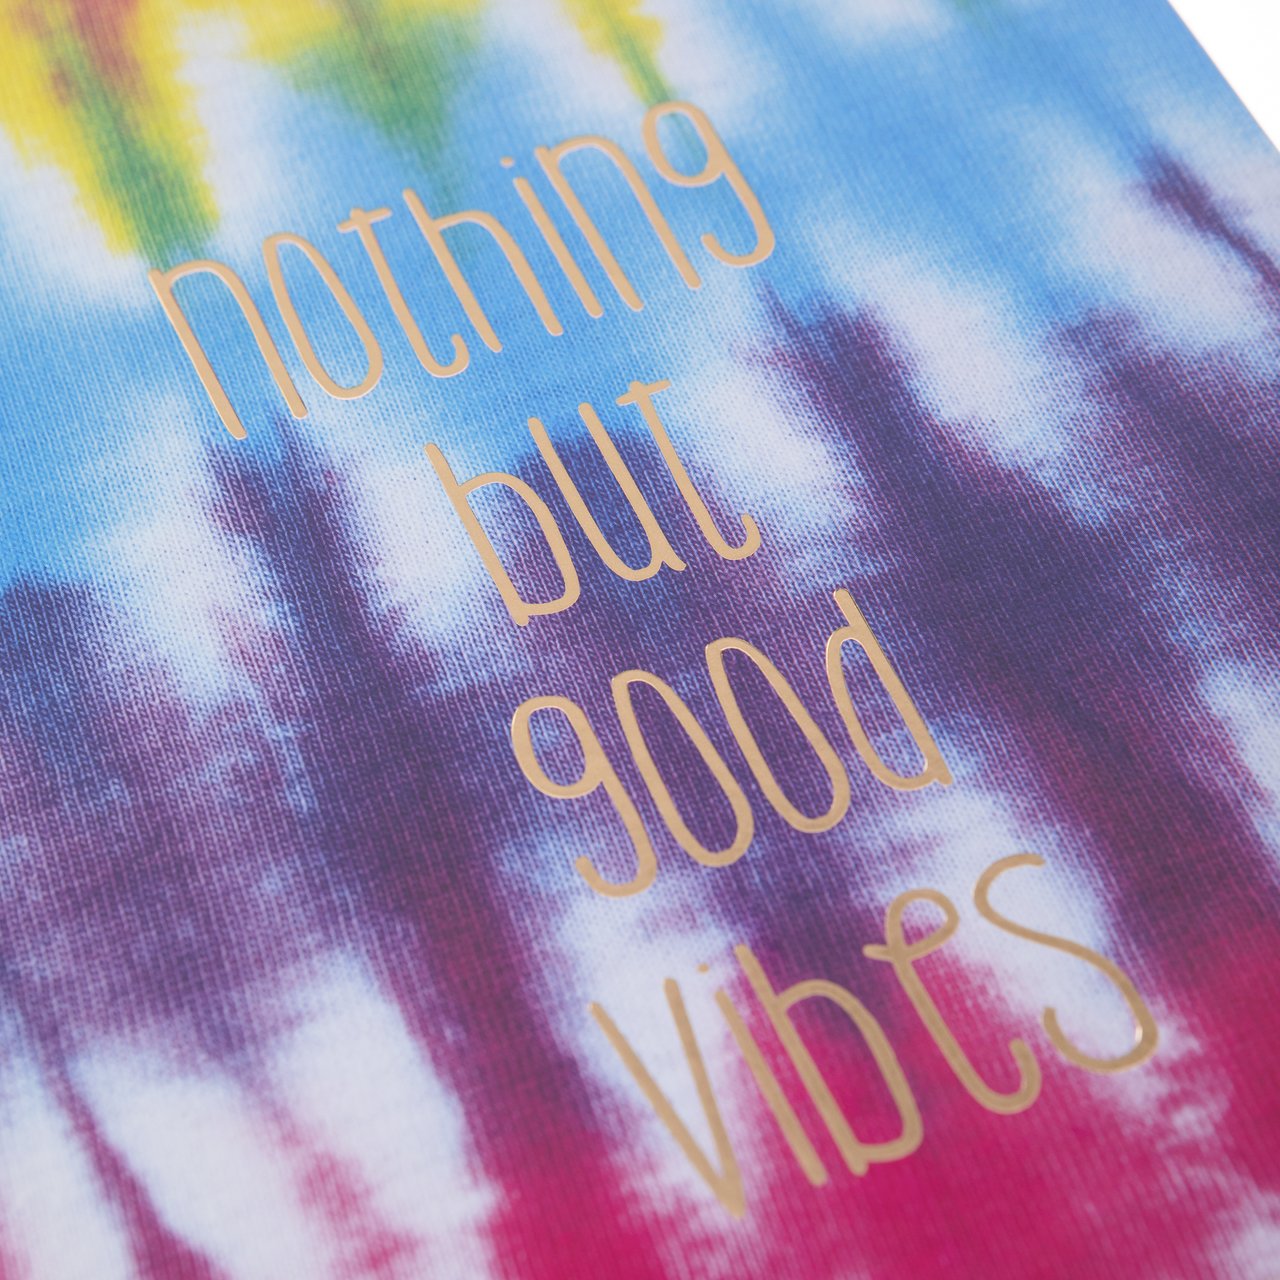 Nothing But Good Vibes Tie Dye Journal    